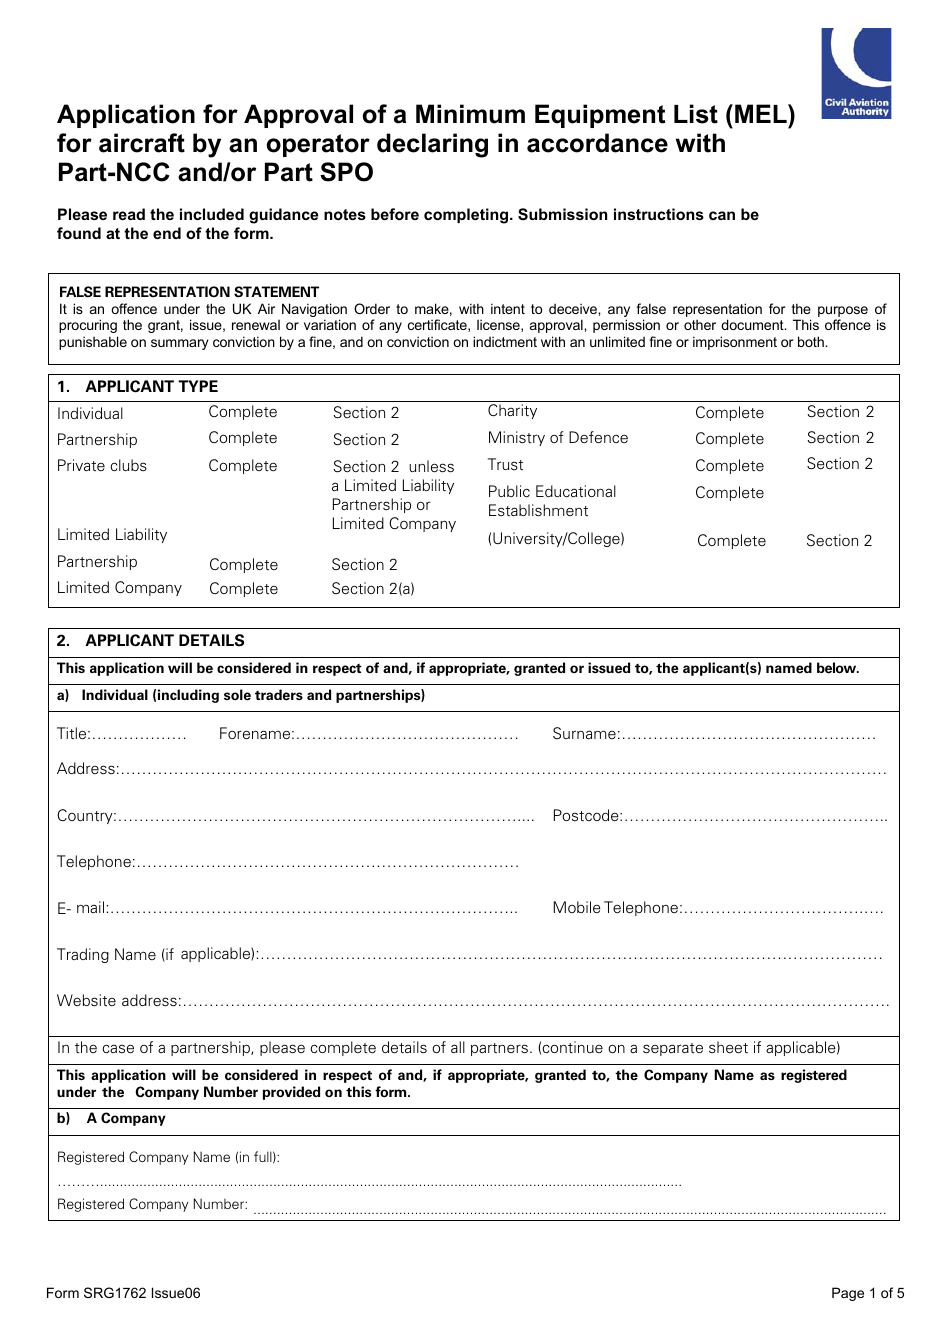 Form SRG1762 Application for Approval of a Minimum Equipment List (Mel) for Aircraft by an Operator Declaring in Accordance With Part-Ncc and / or Part Spo - United Kingdom, Page 1